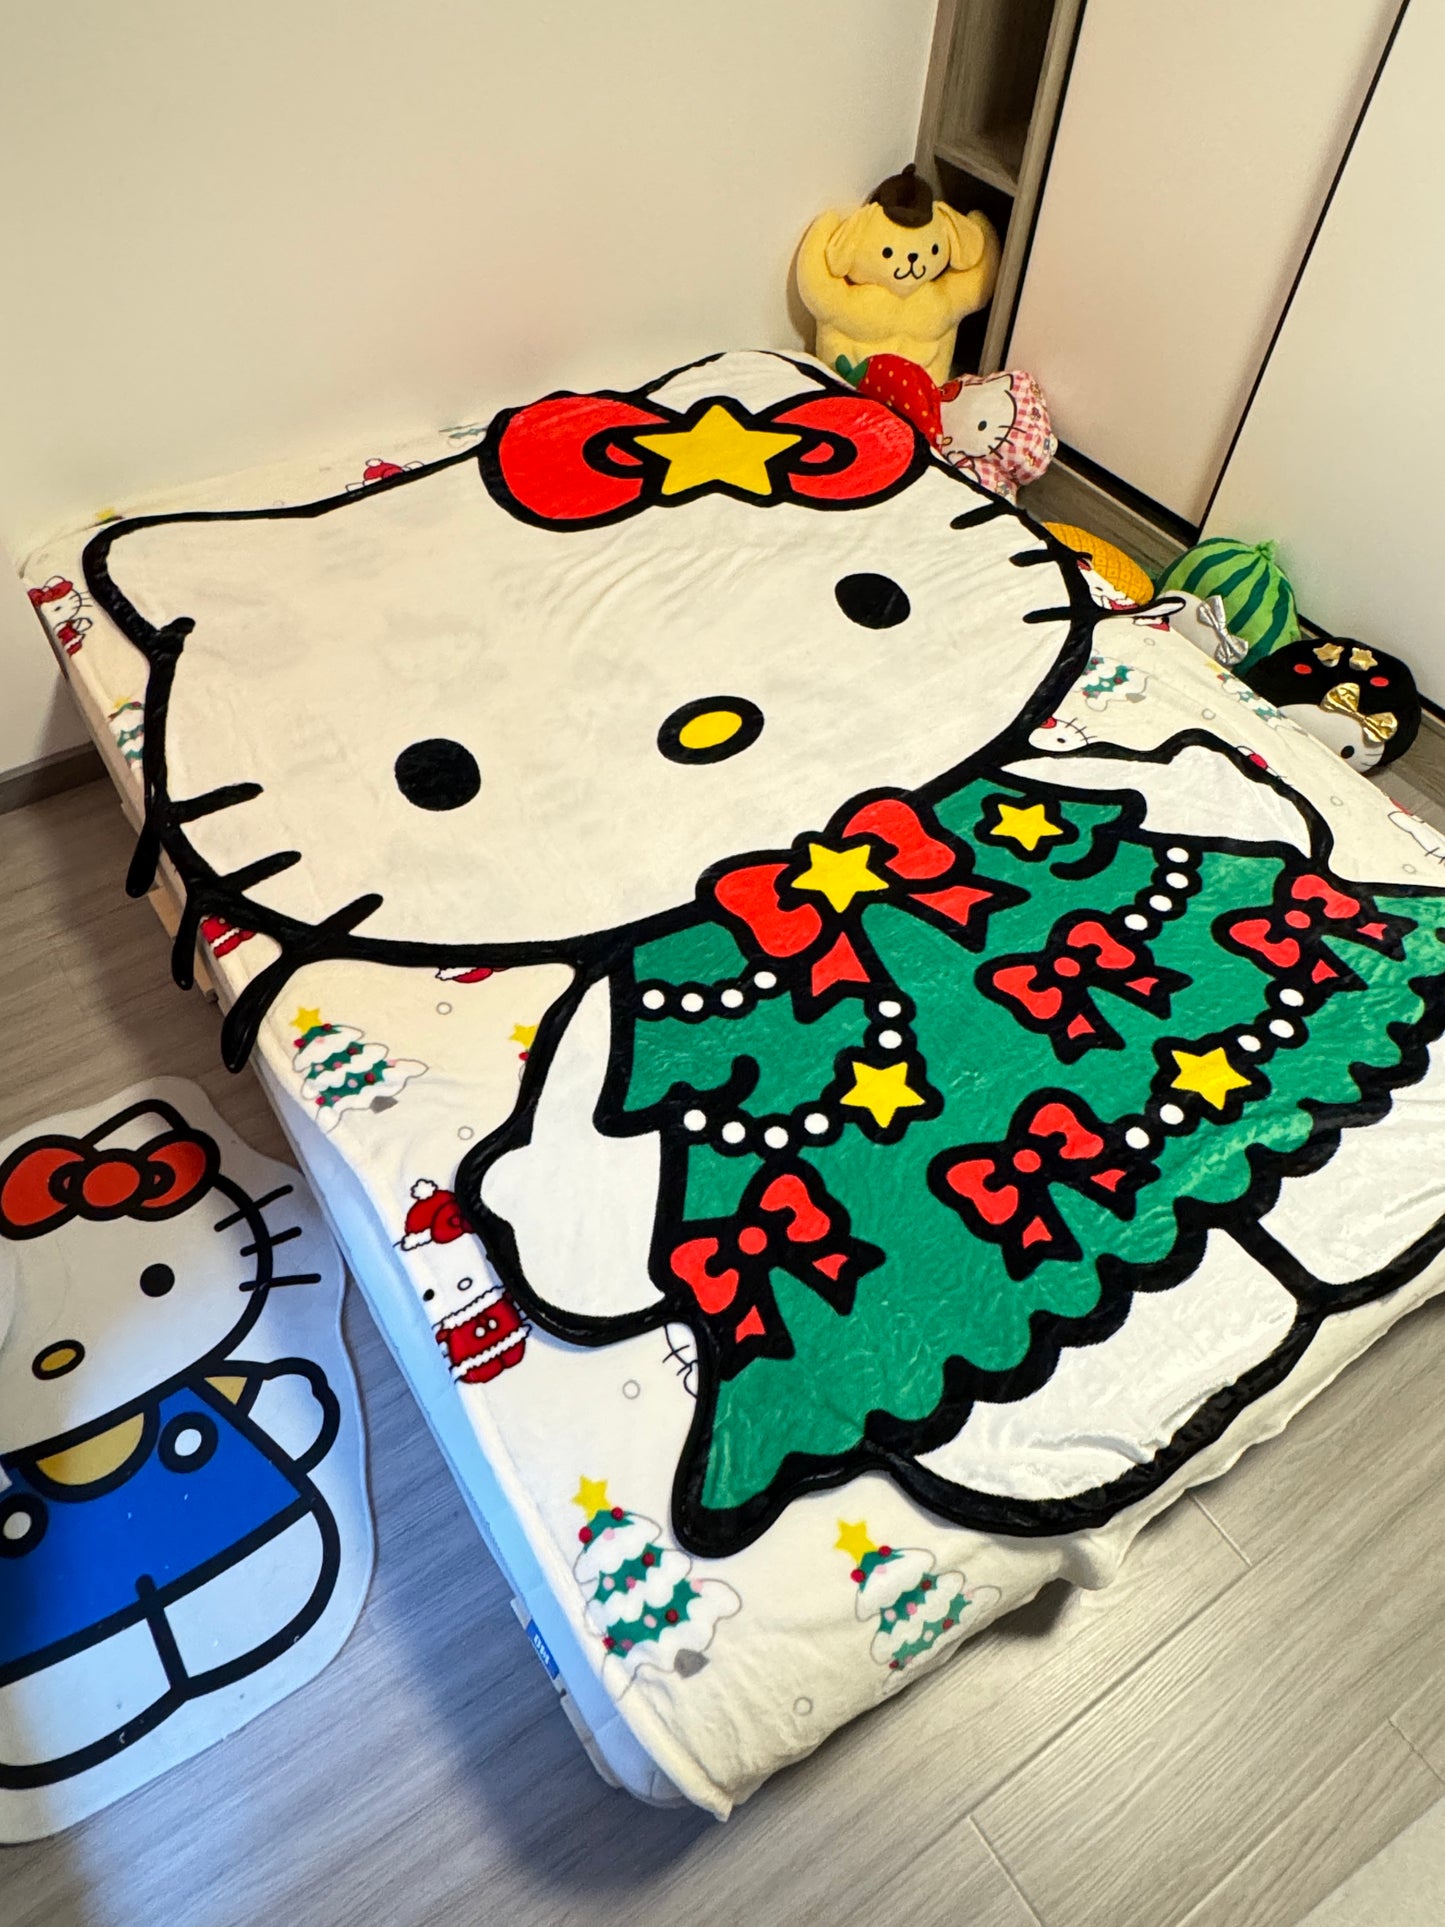 Hellokitty Shape Christmas Blanket Flannel Throw Blanket Cute Blanket Lightweight Soft Cozy for Bed Kids Adult Womens Gifts for Christmas |Thicker Version